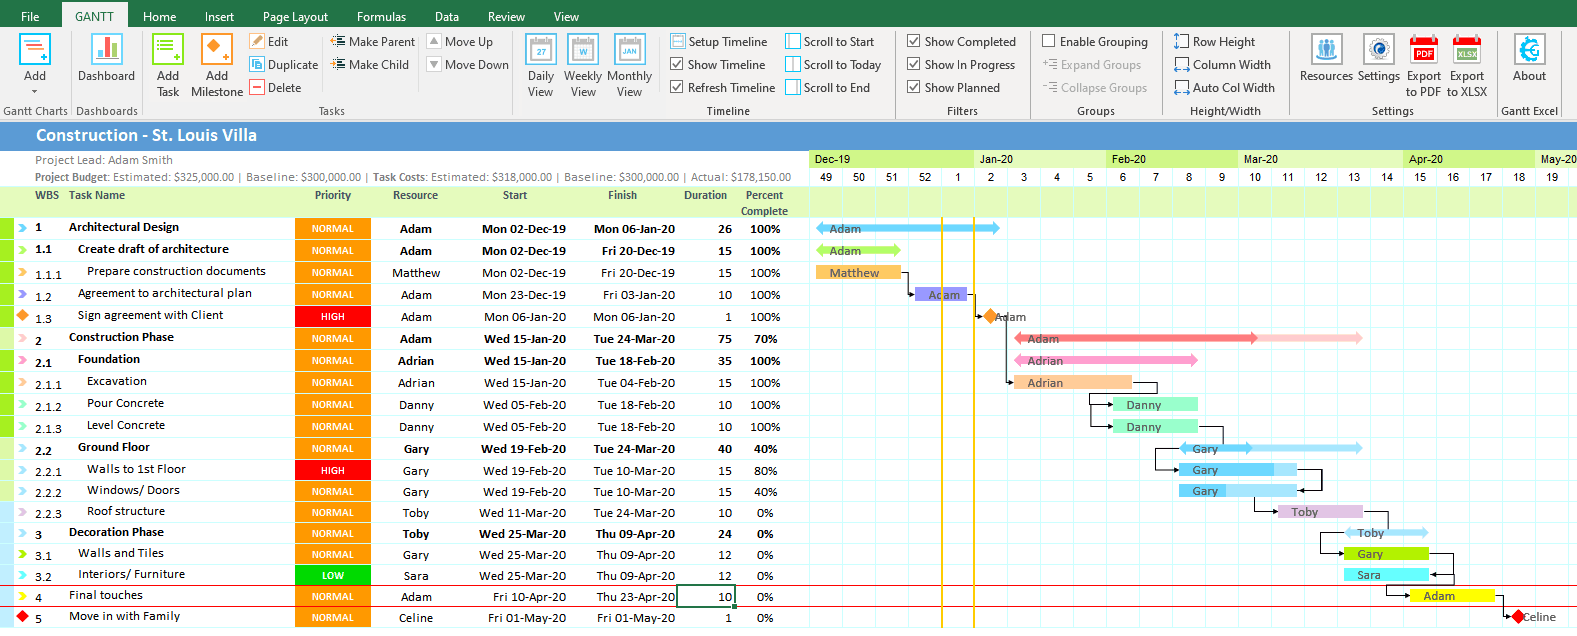 How To Create A Gantt Chart In Excel With Months And Weeks - Infoupdate.org